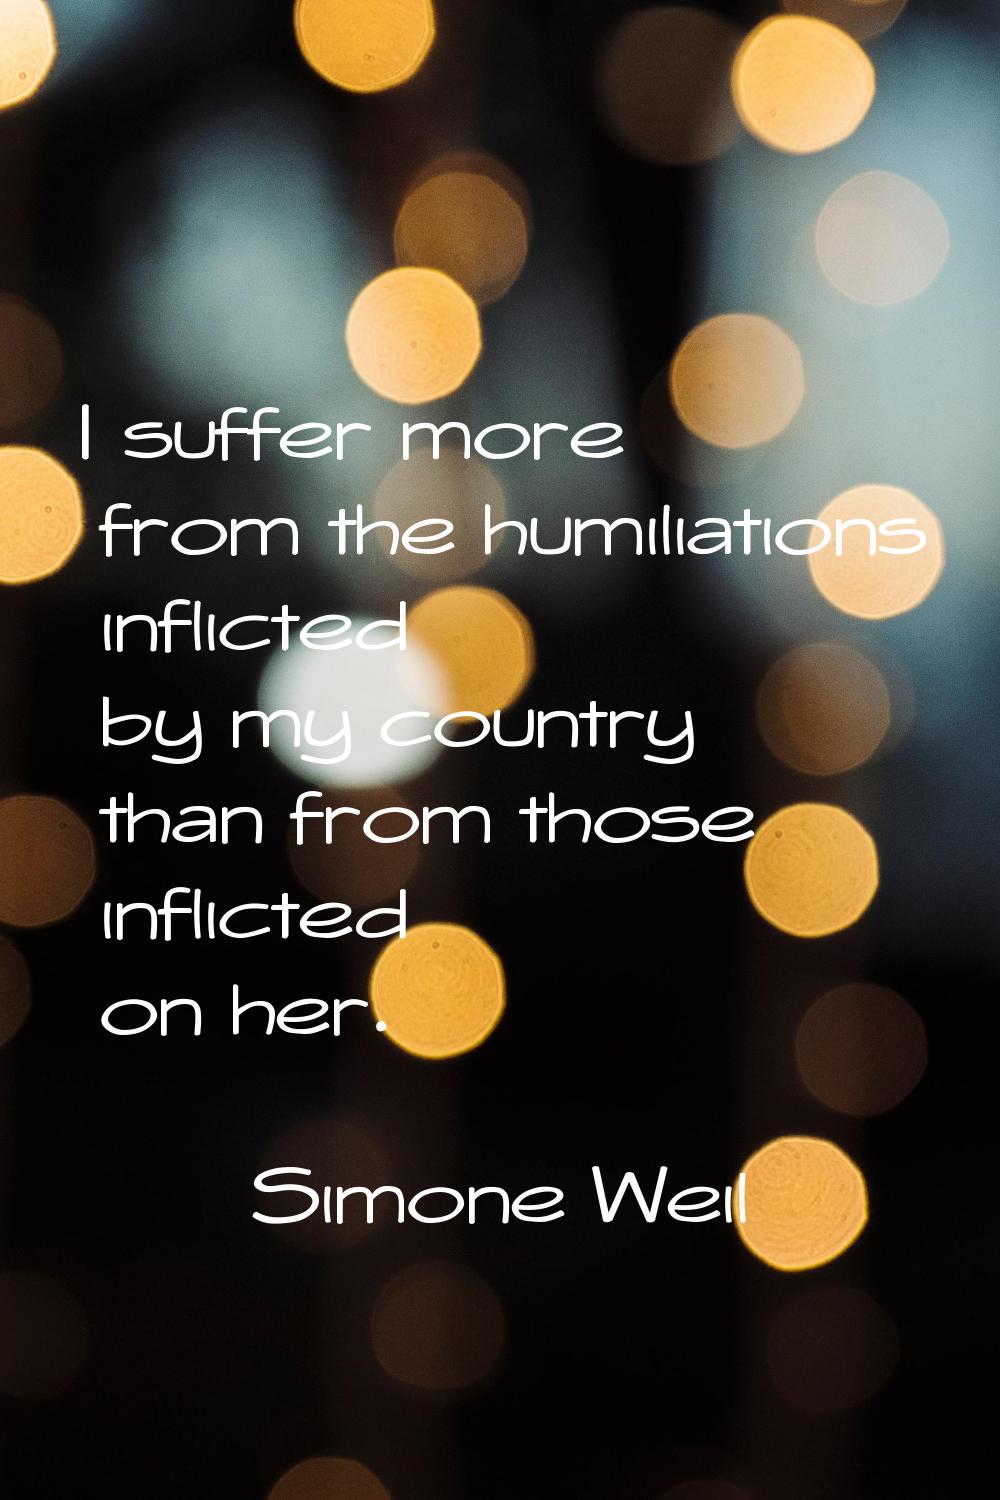 I suffer more from the humiliations inflicted by my country than from those inflicted on her.